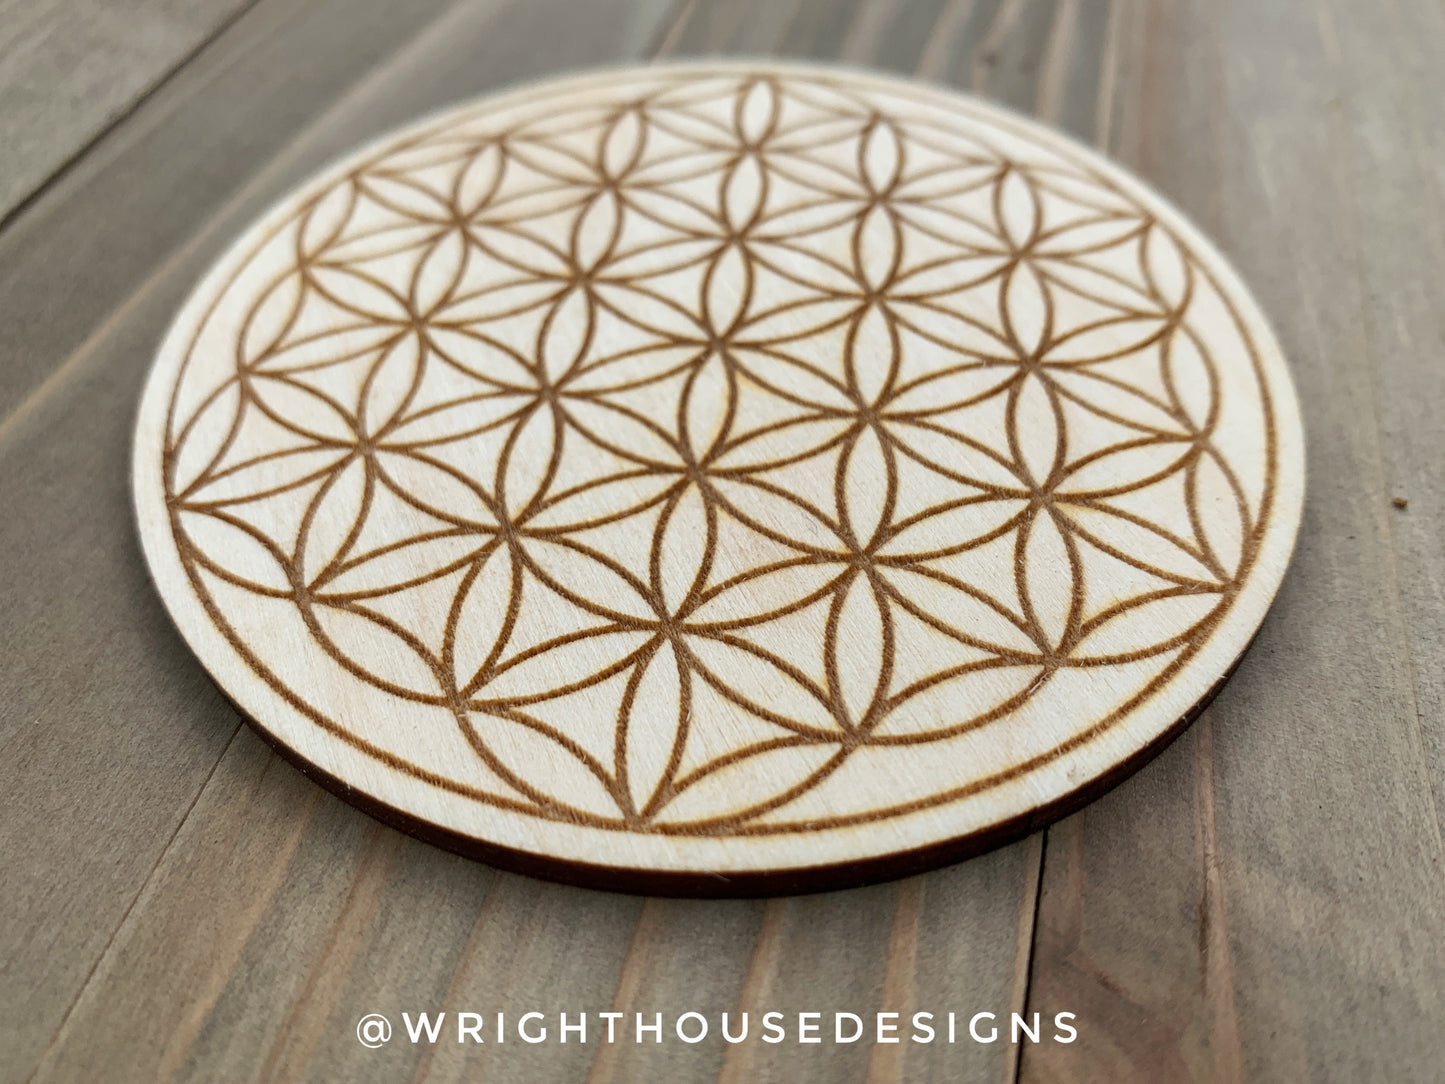 Flower Of Life - Wooden Coffee Coasters and Crystal Grids - Bundle